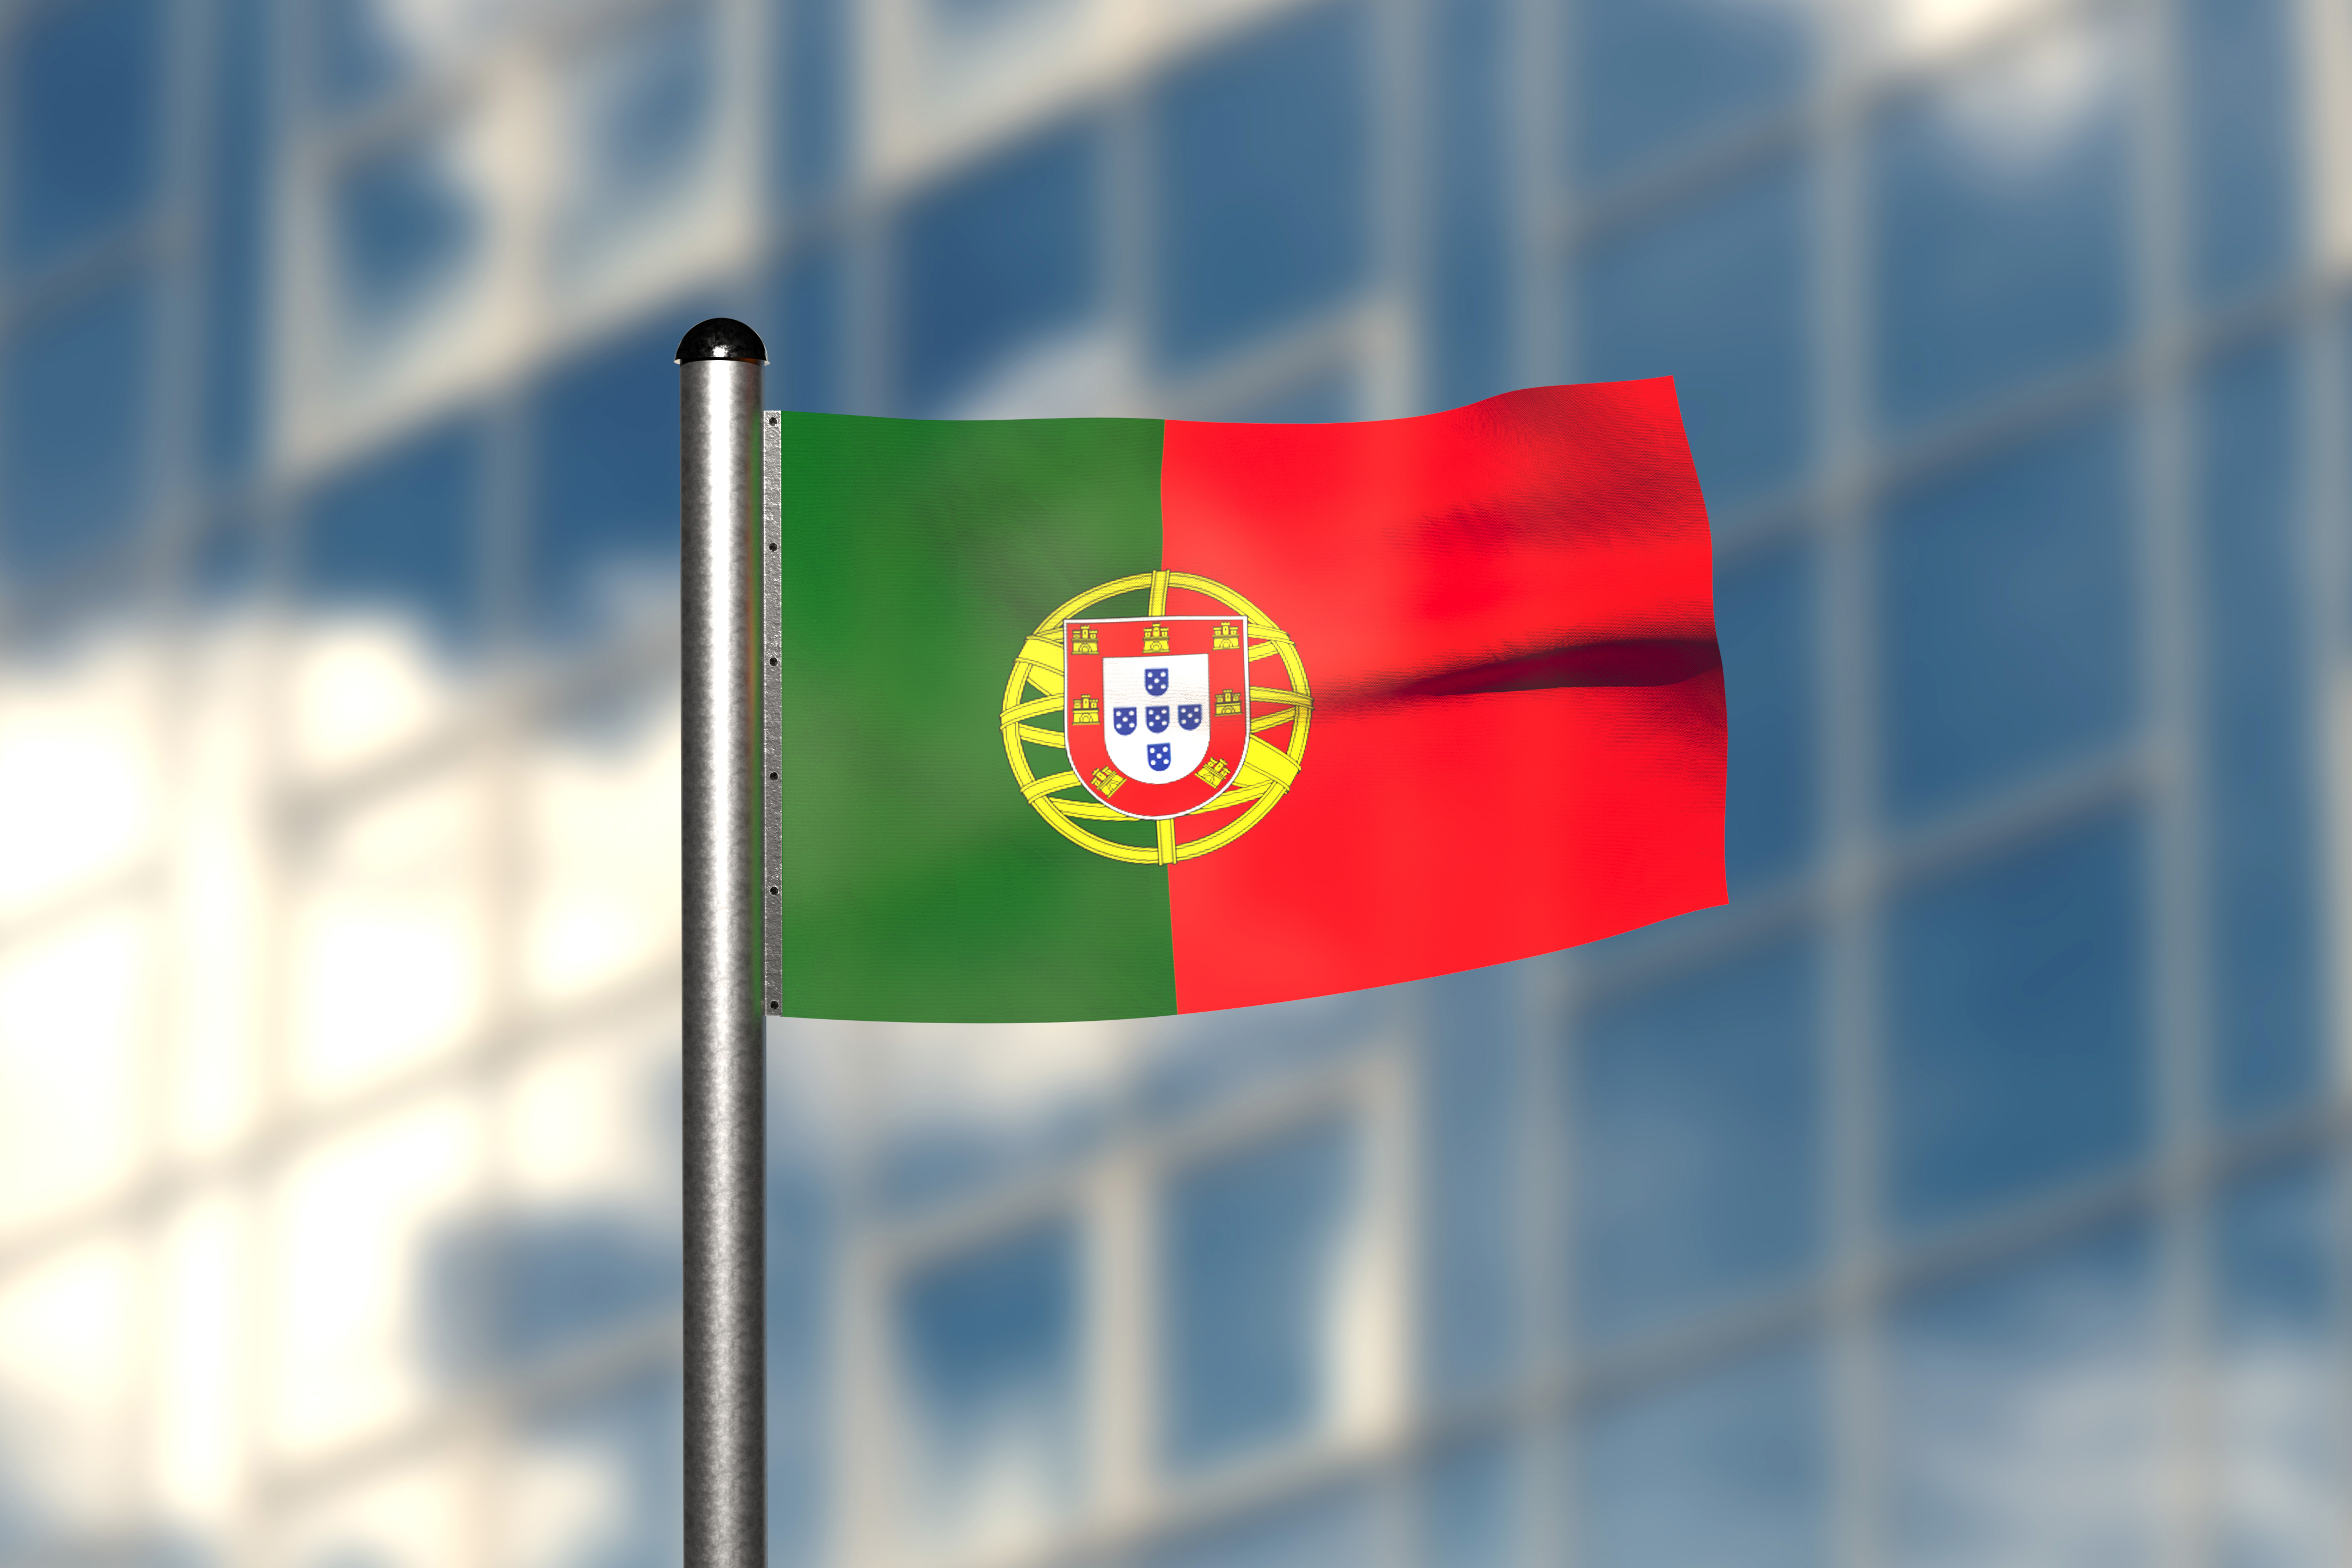 The Portuguese flag on the background of the building symbolizes obtaining a residence permit in Portugal when buying real estate